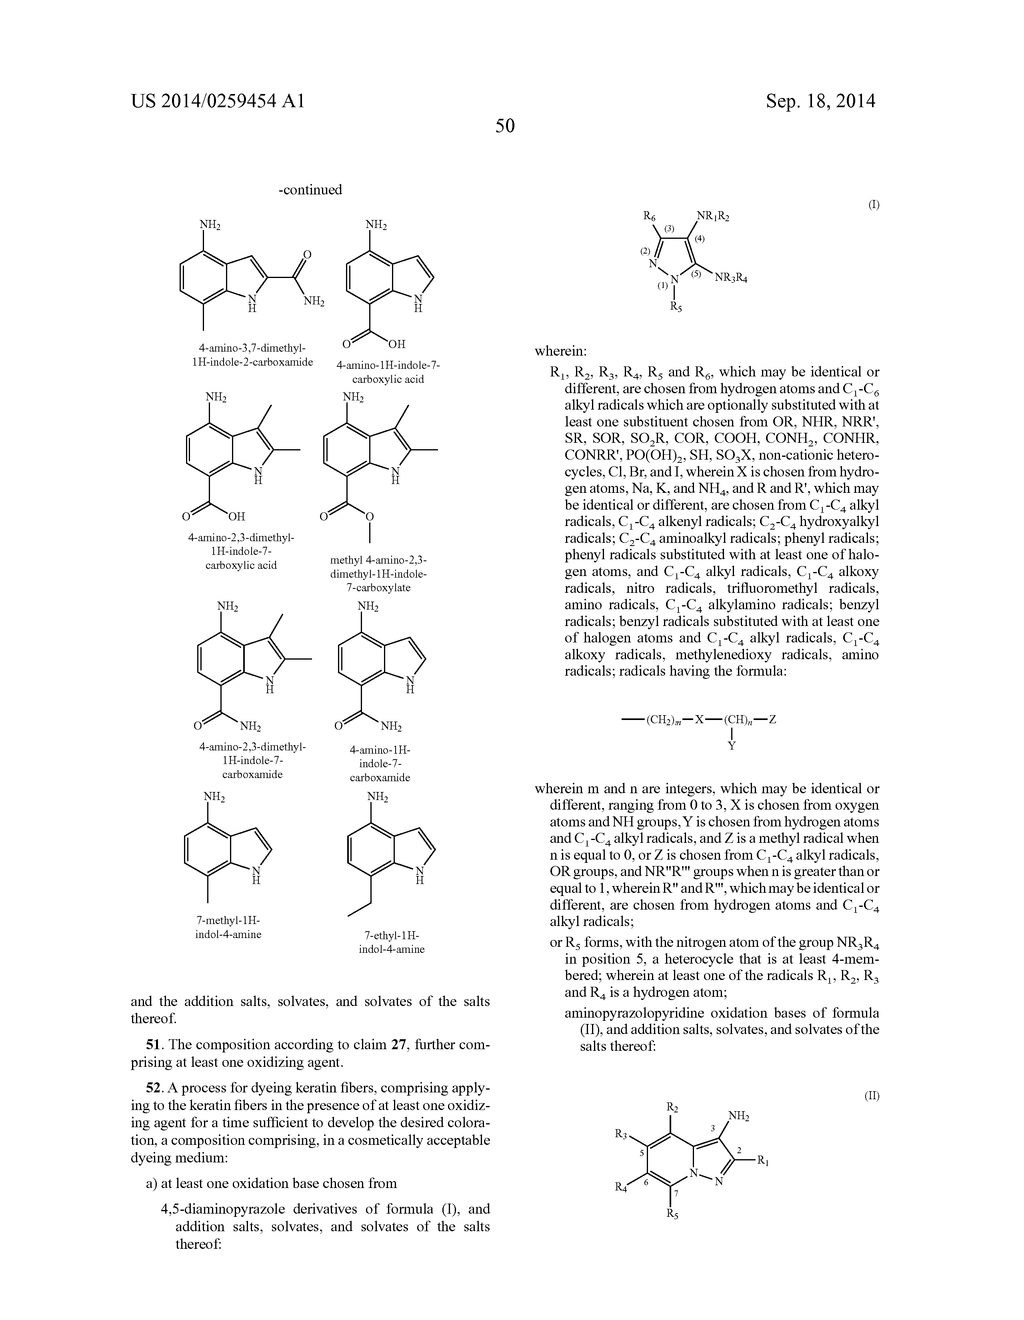 DYE COMPOSITION COMPRISING A HETEROCYCLIC OXIDATION BASE AND A     4-AMINOINDOLE COUPLER - diagram, schematic, and image 51